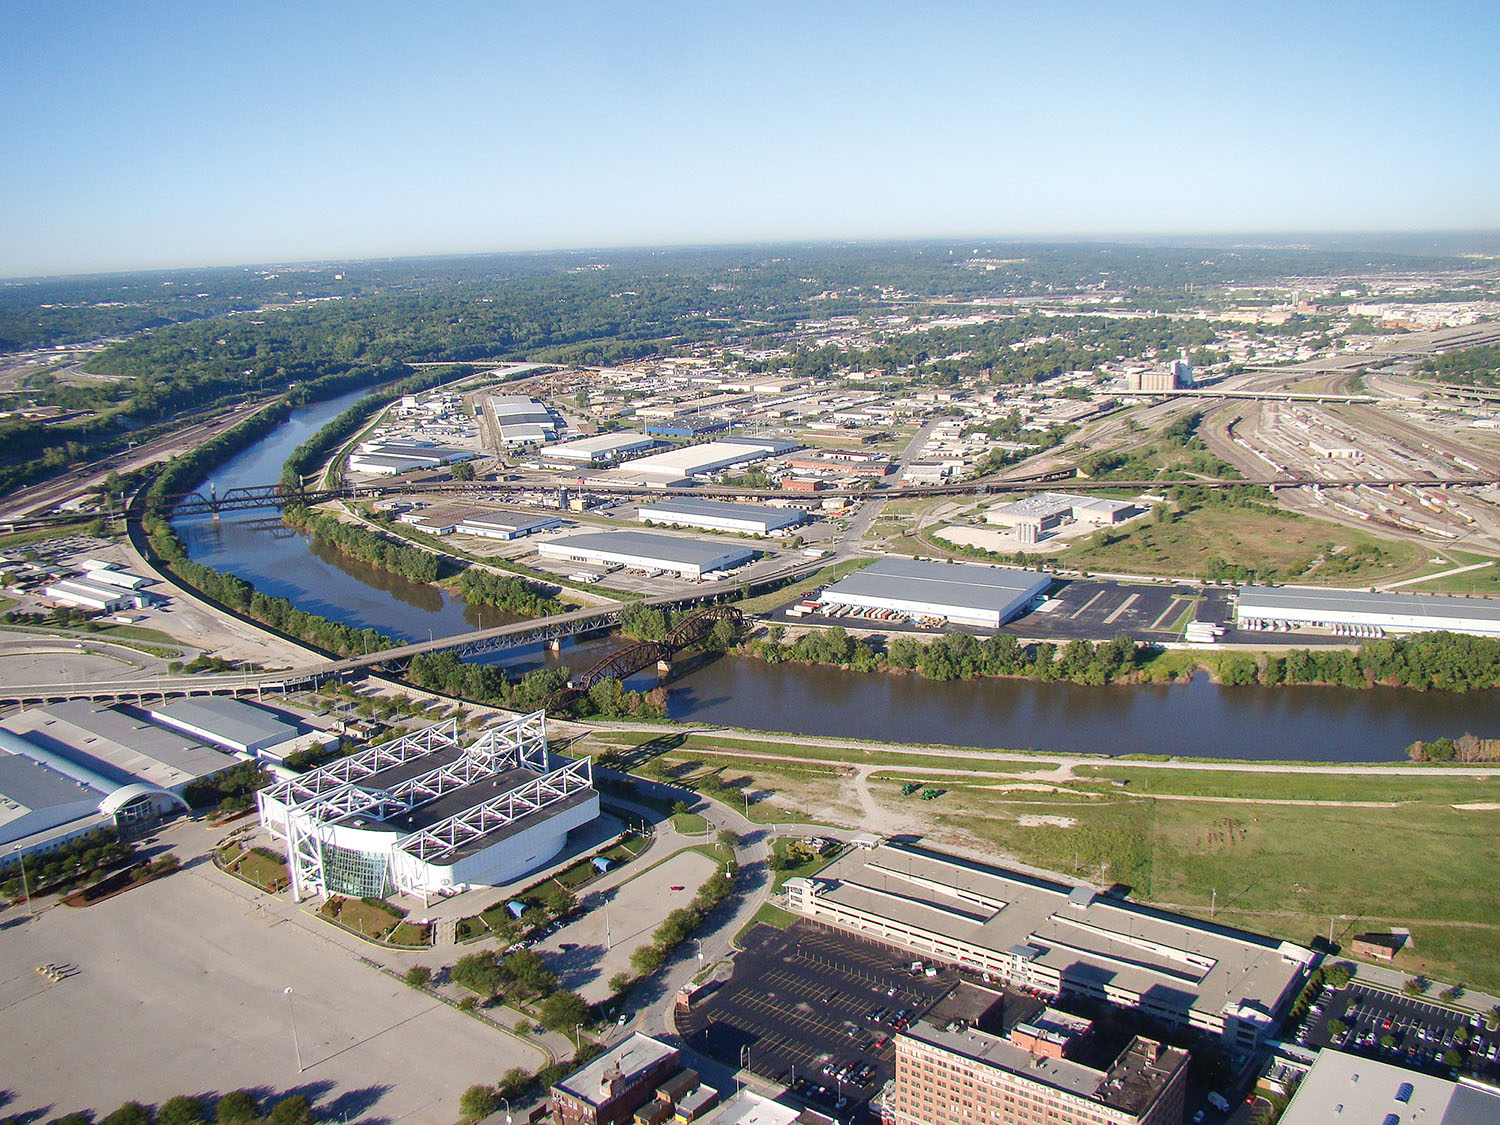 Aerial view of the Kansas River overlooking the Central Industrial District Levee Unit (foreground) and Armourdale Levee Unit (background). (Photo courtesy of Kansas City Engineer District)